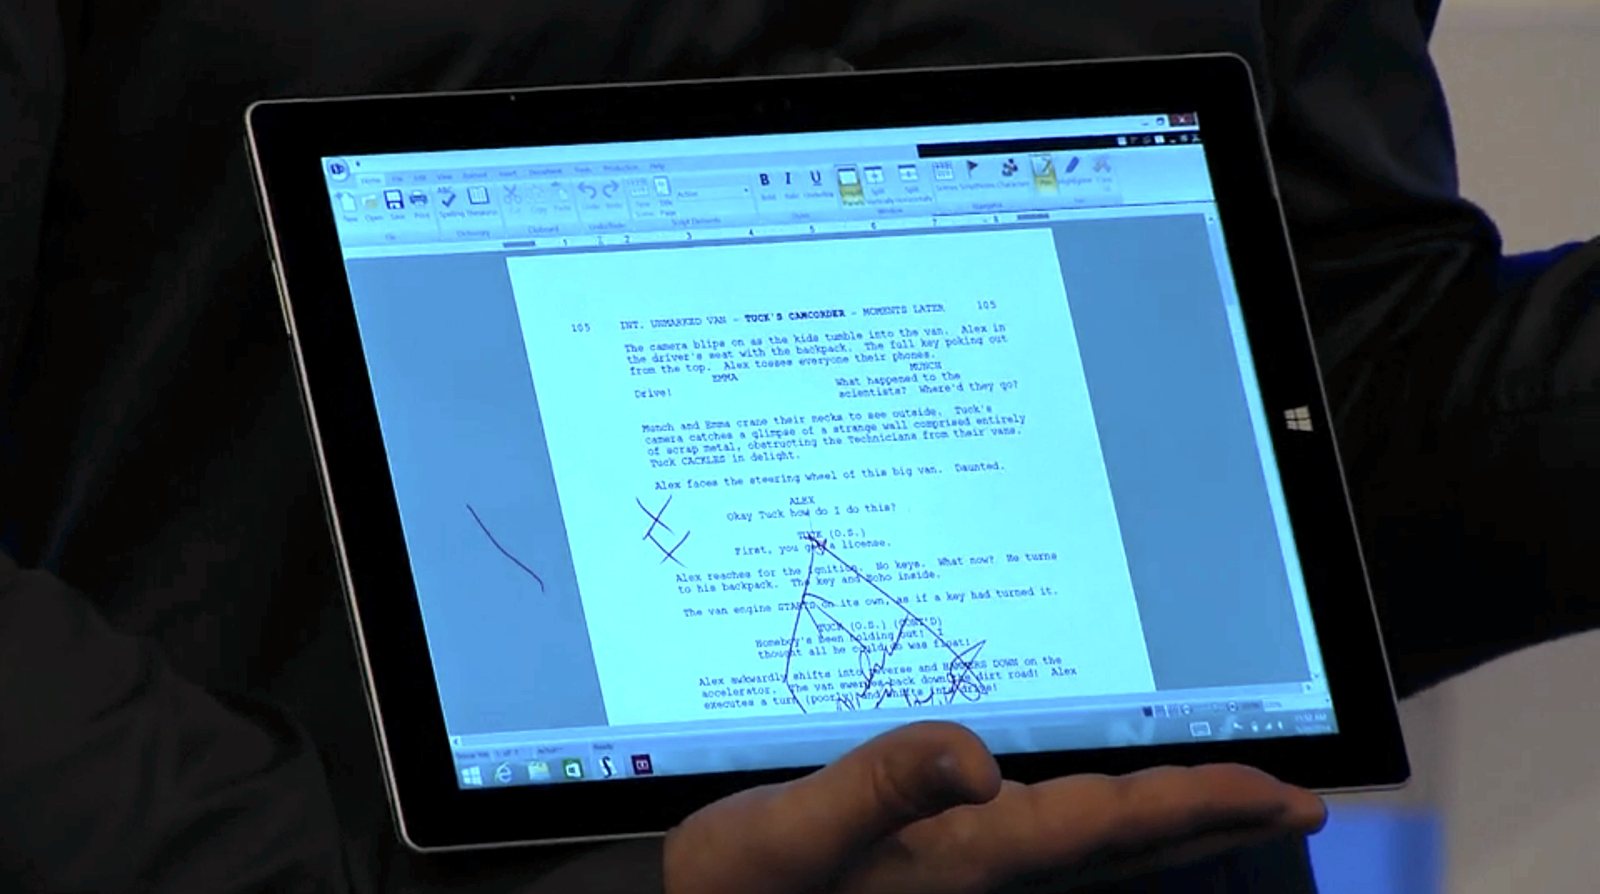 In landscape mode, the handwritten notes have shifted position, and no longer line up with the parts of the script they refer to.